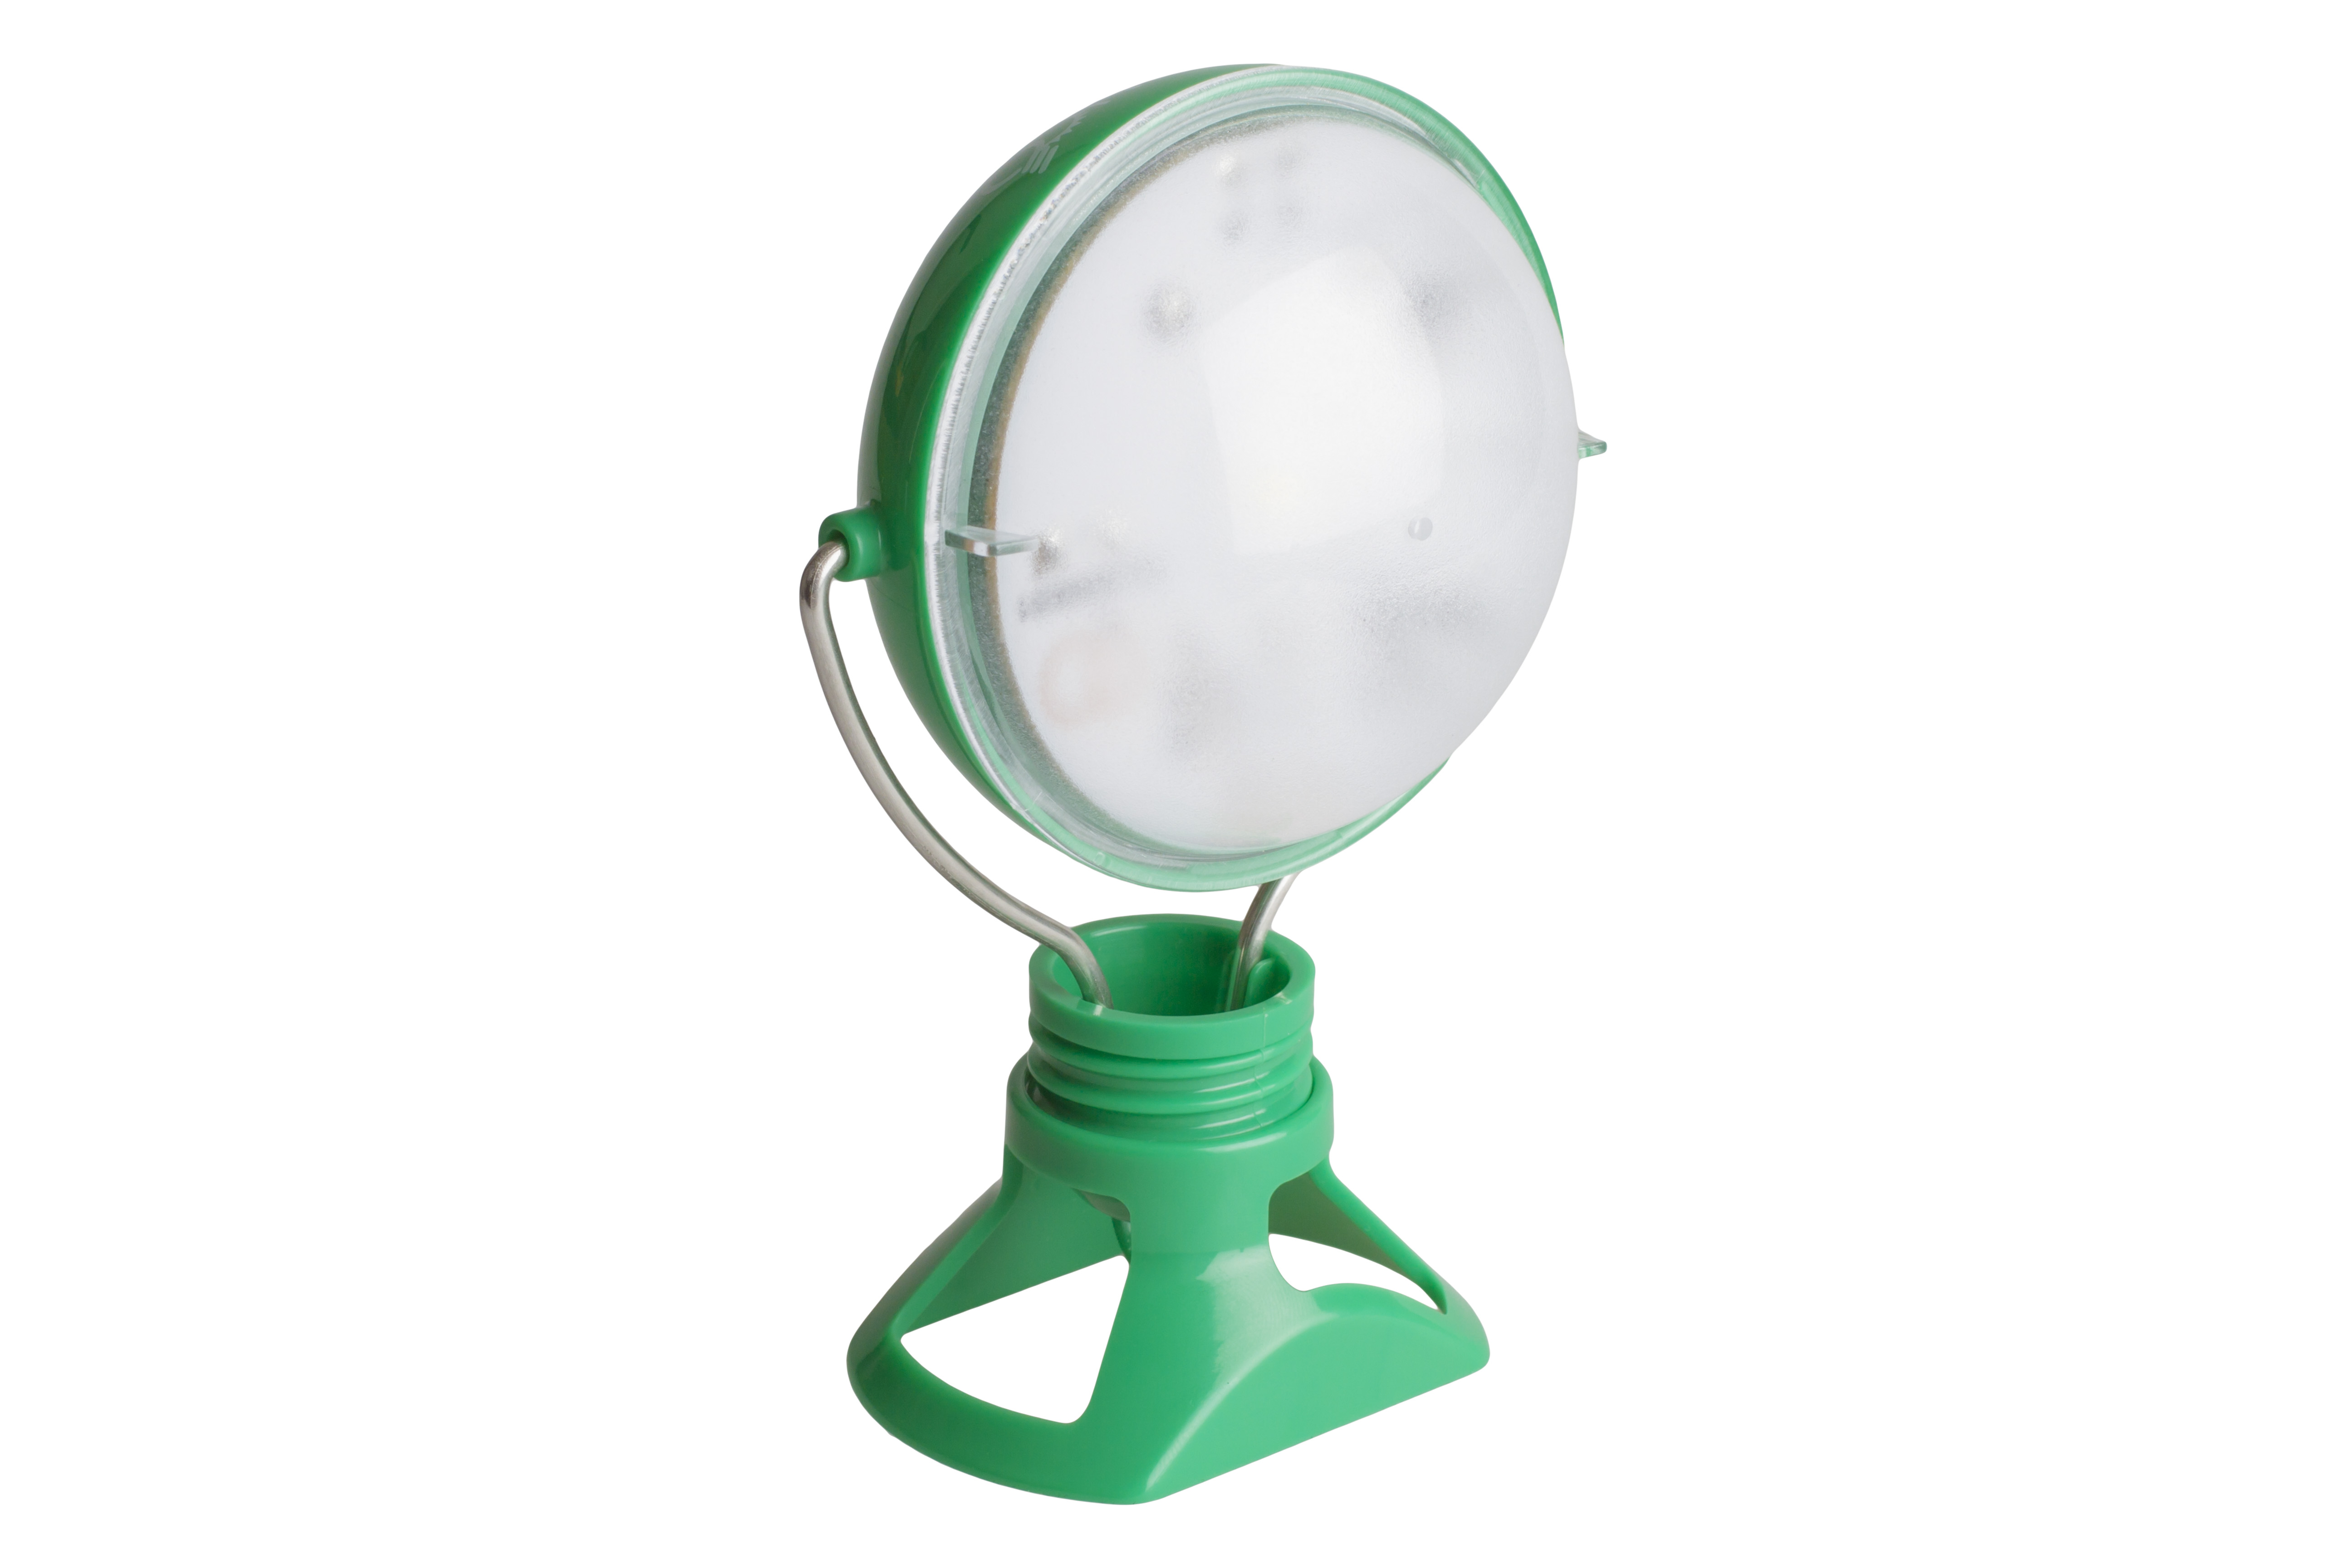 Each Prima N202 Solar Light comes with a twist-on stand for personal use.